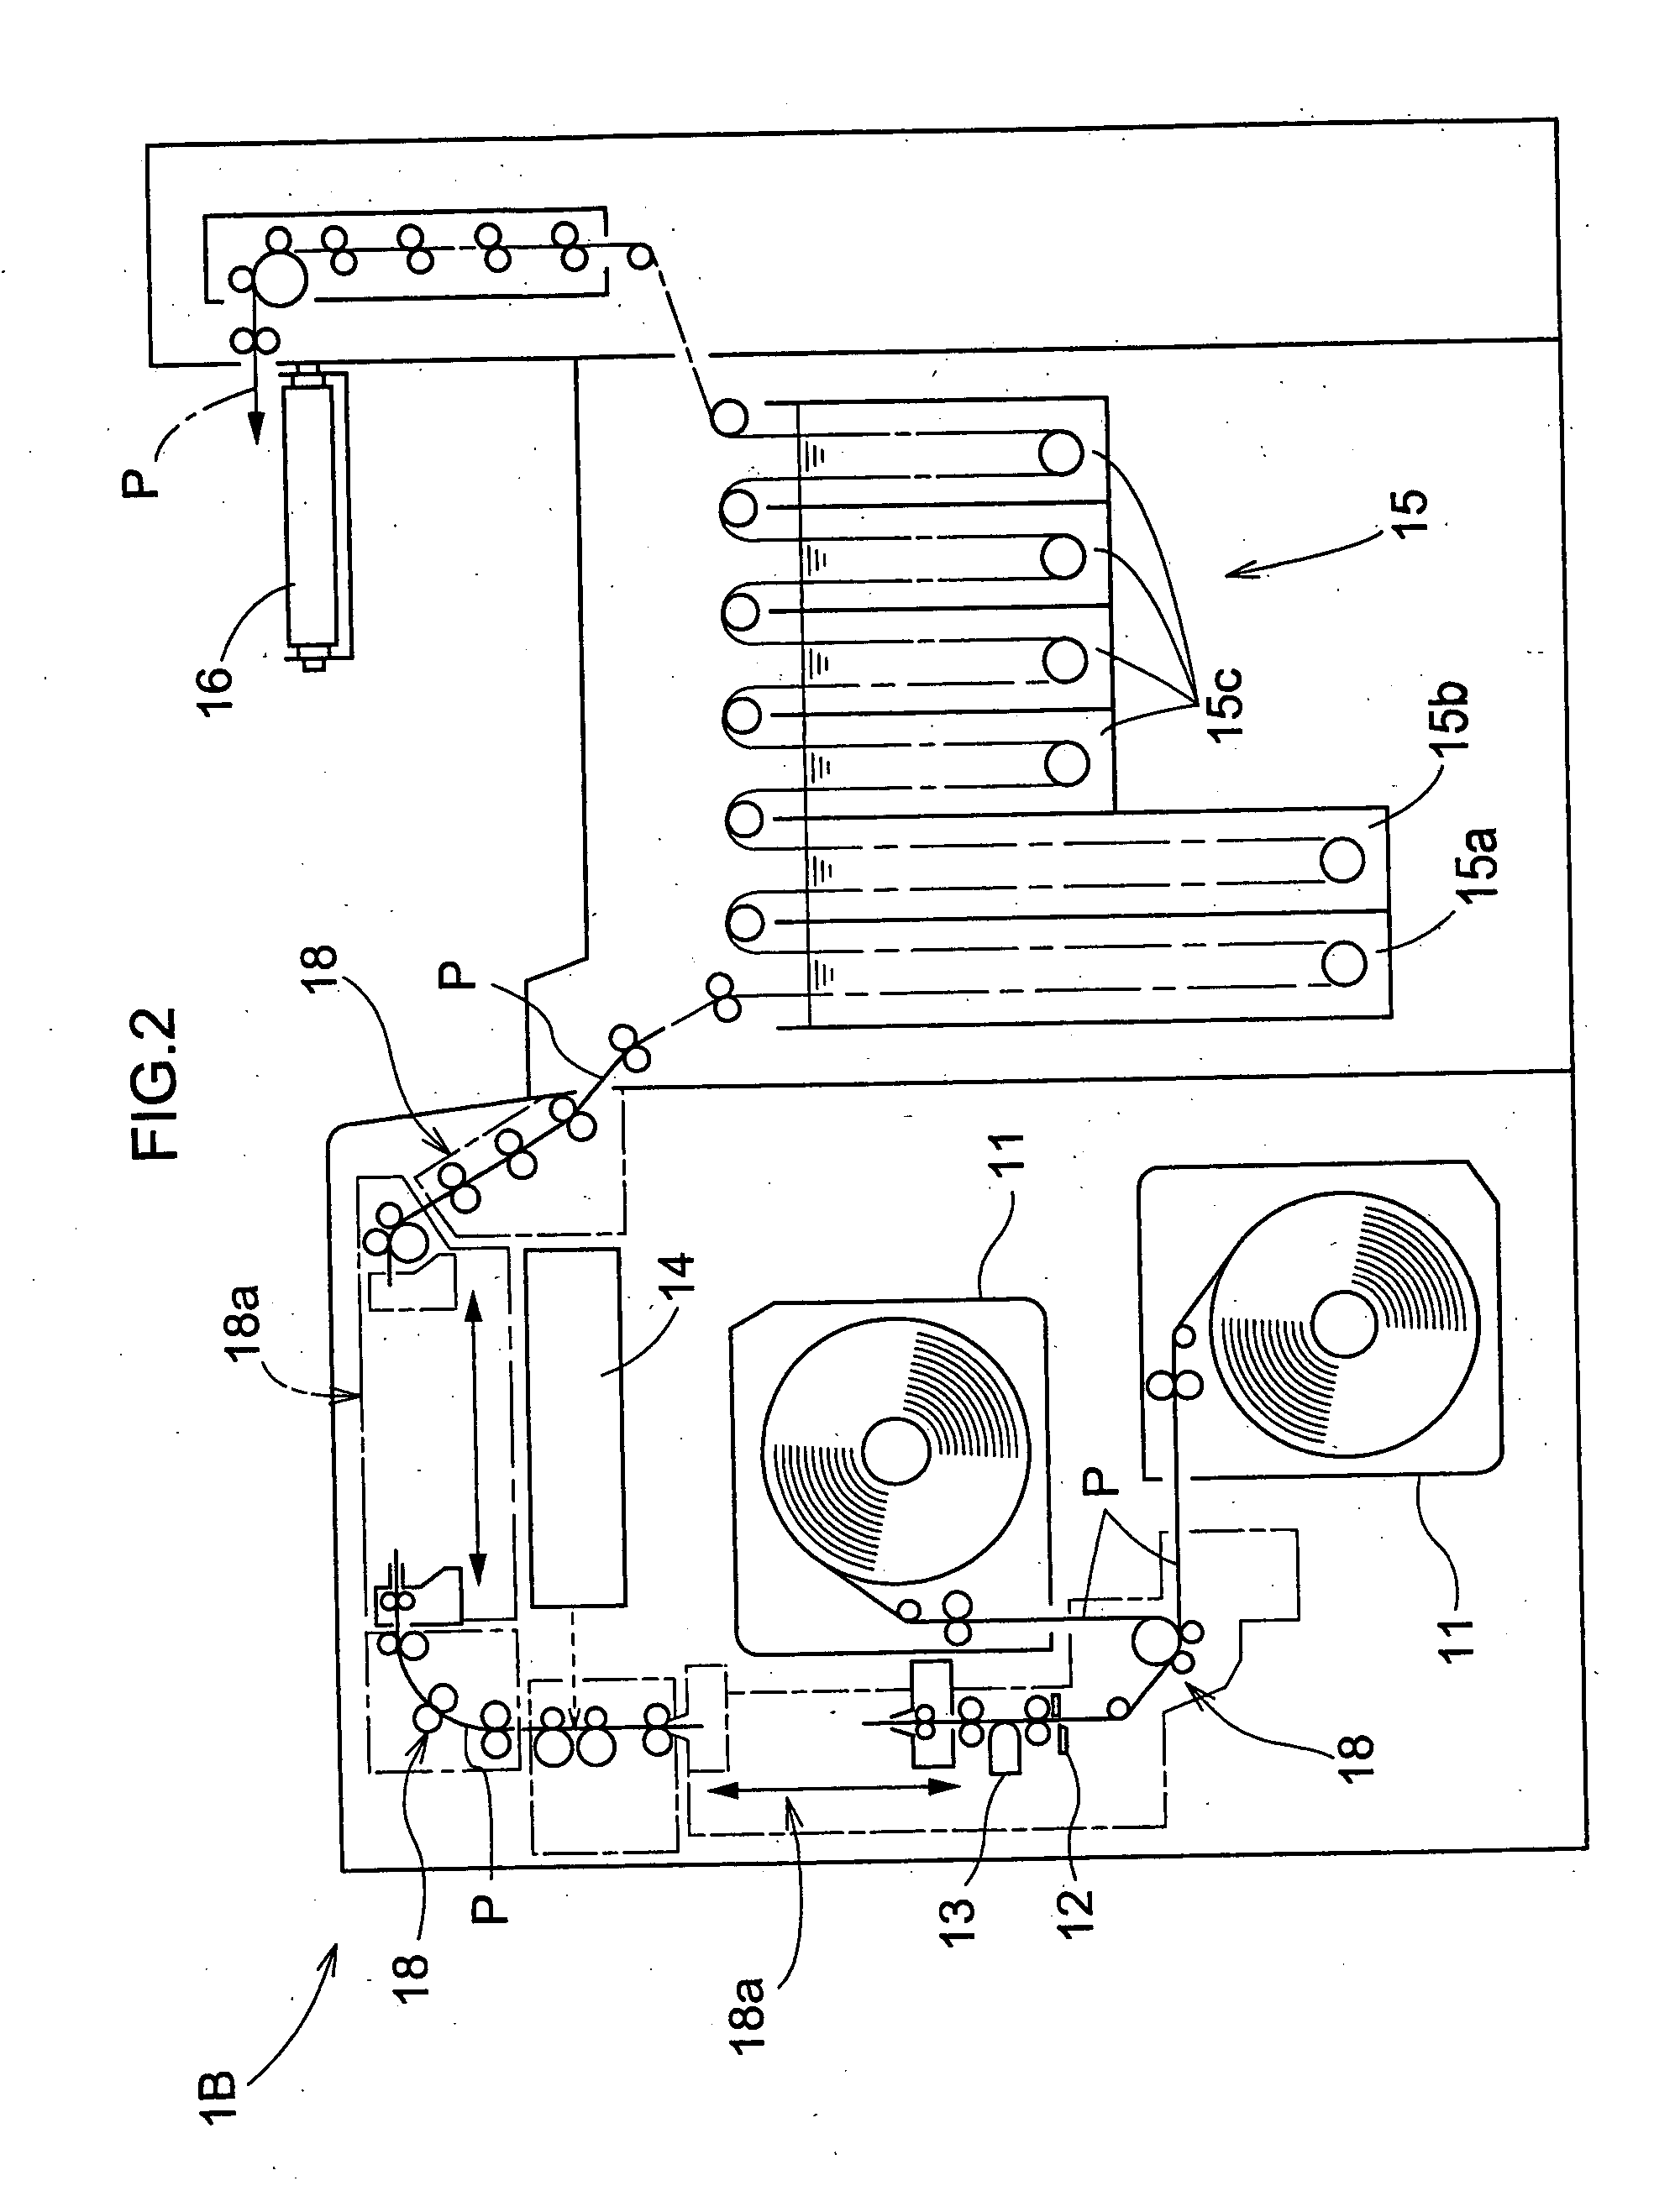 Image processing method and apparatus for white eye correction